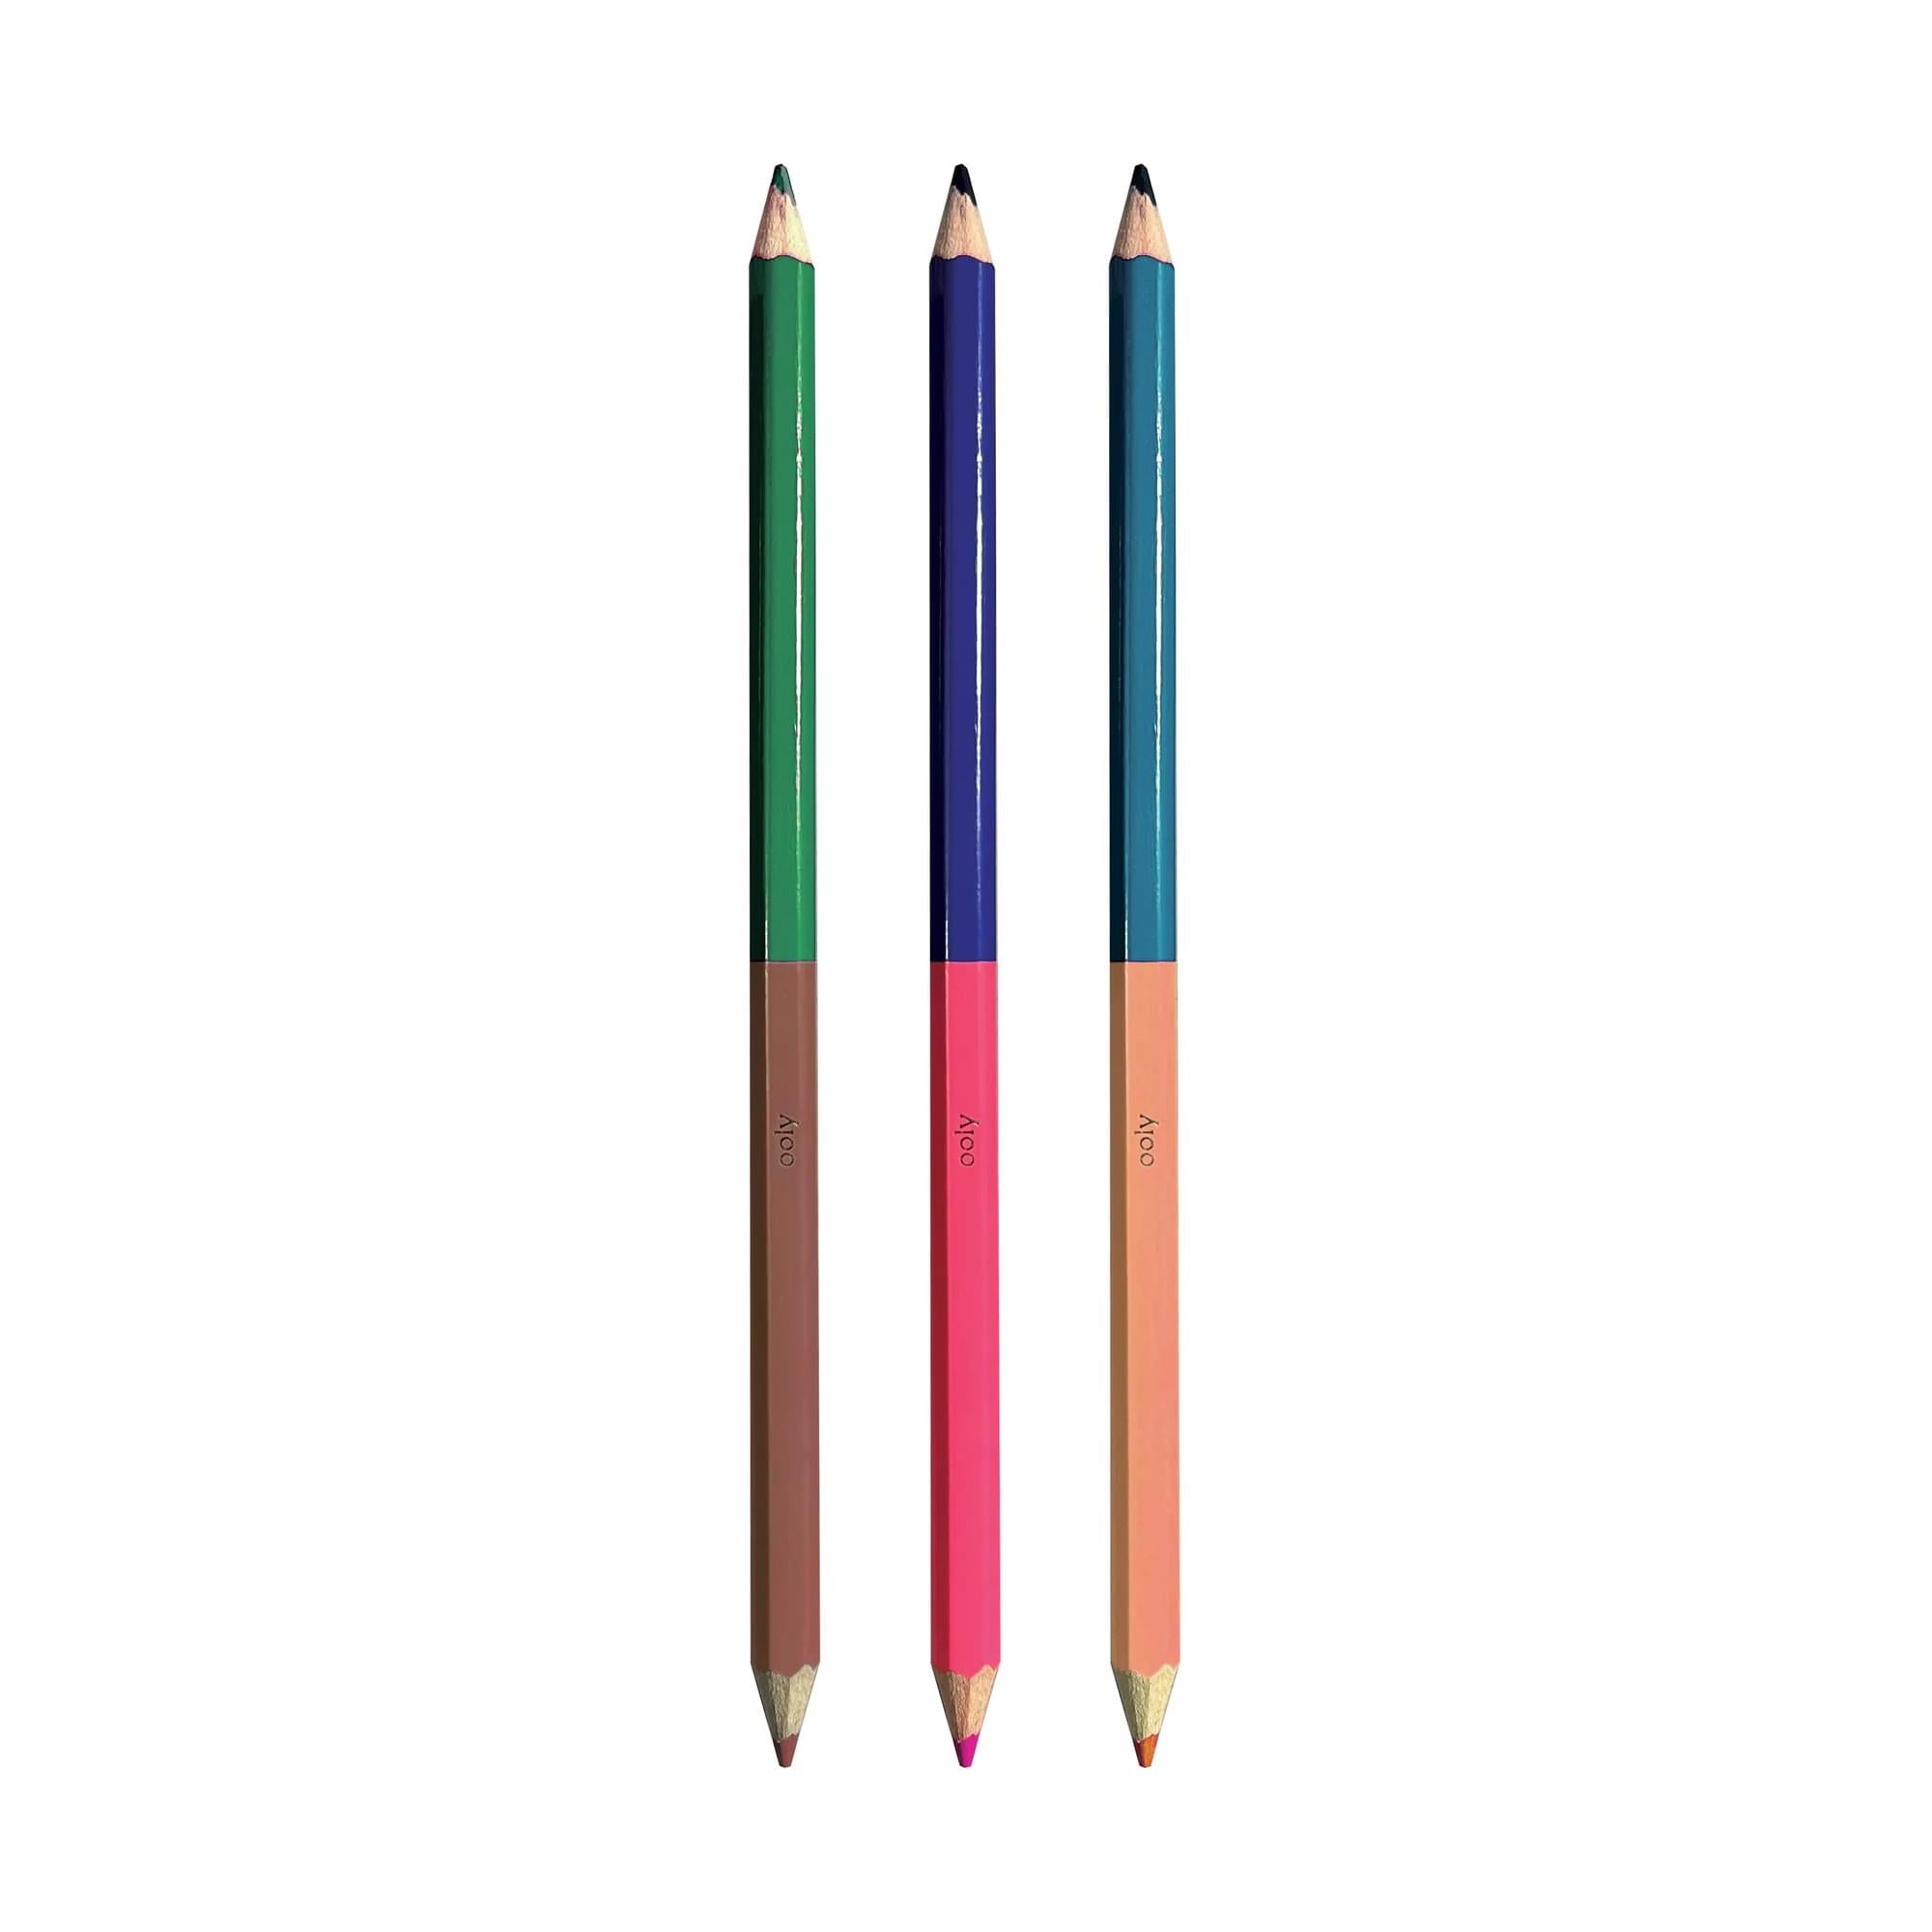 Wholesale Electronic Pencil Box For All Sorts of Pencils 